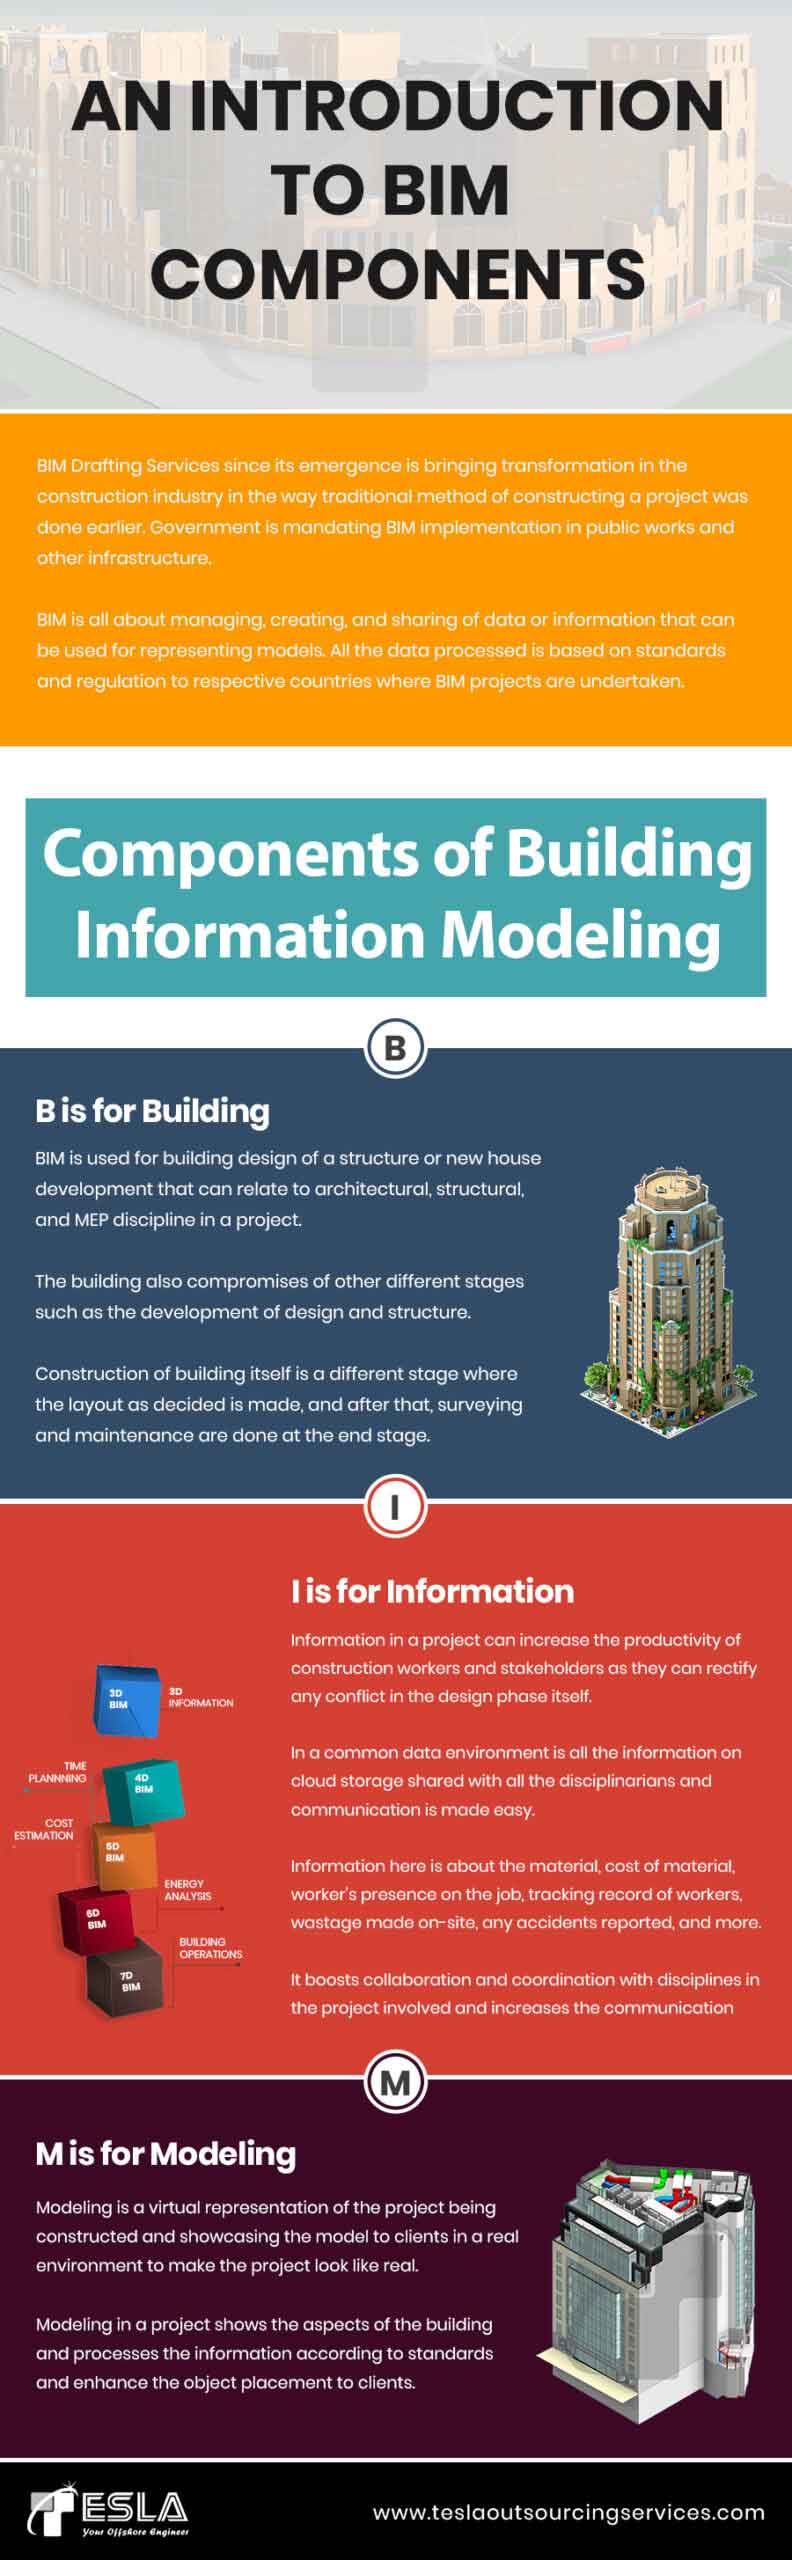 An introduction to BIM Components
